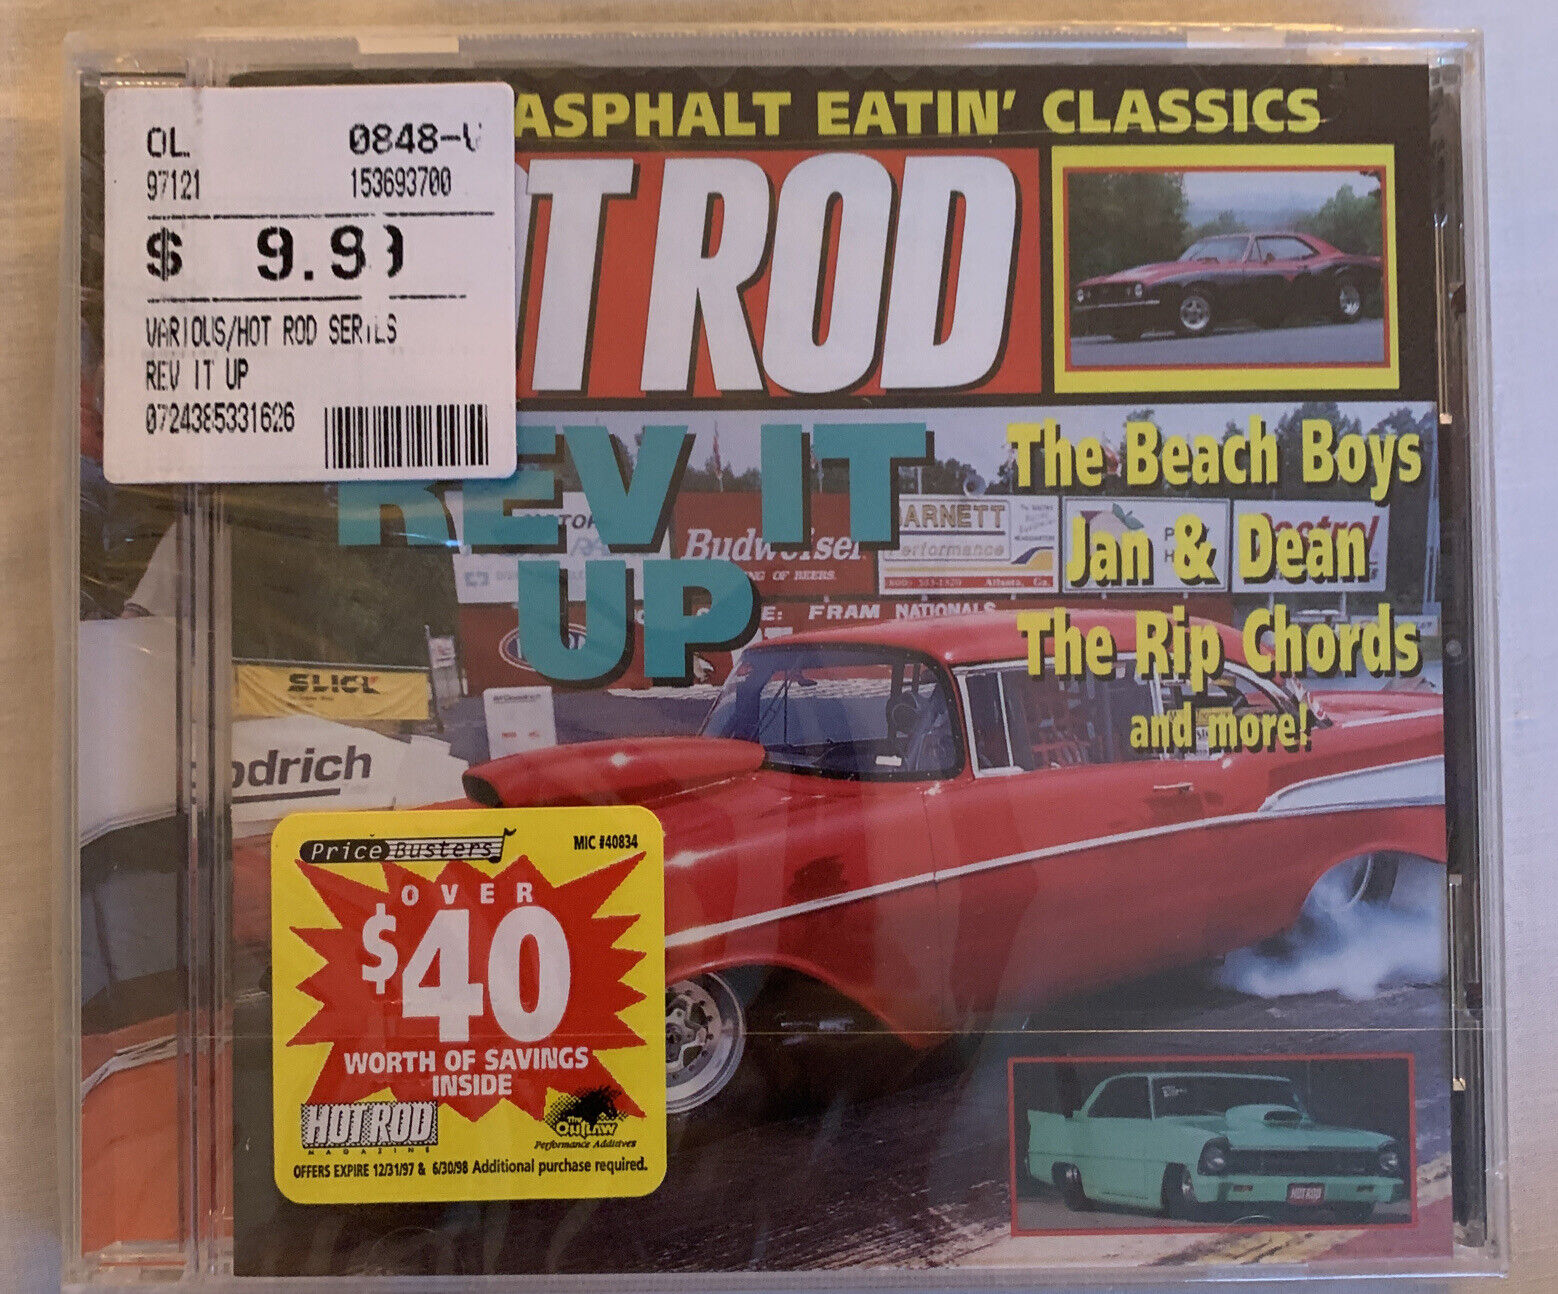 Hot Rod: Rev It Up by Various Artists (CD, May-1997, The Right Stuff)